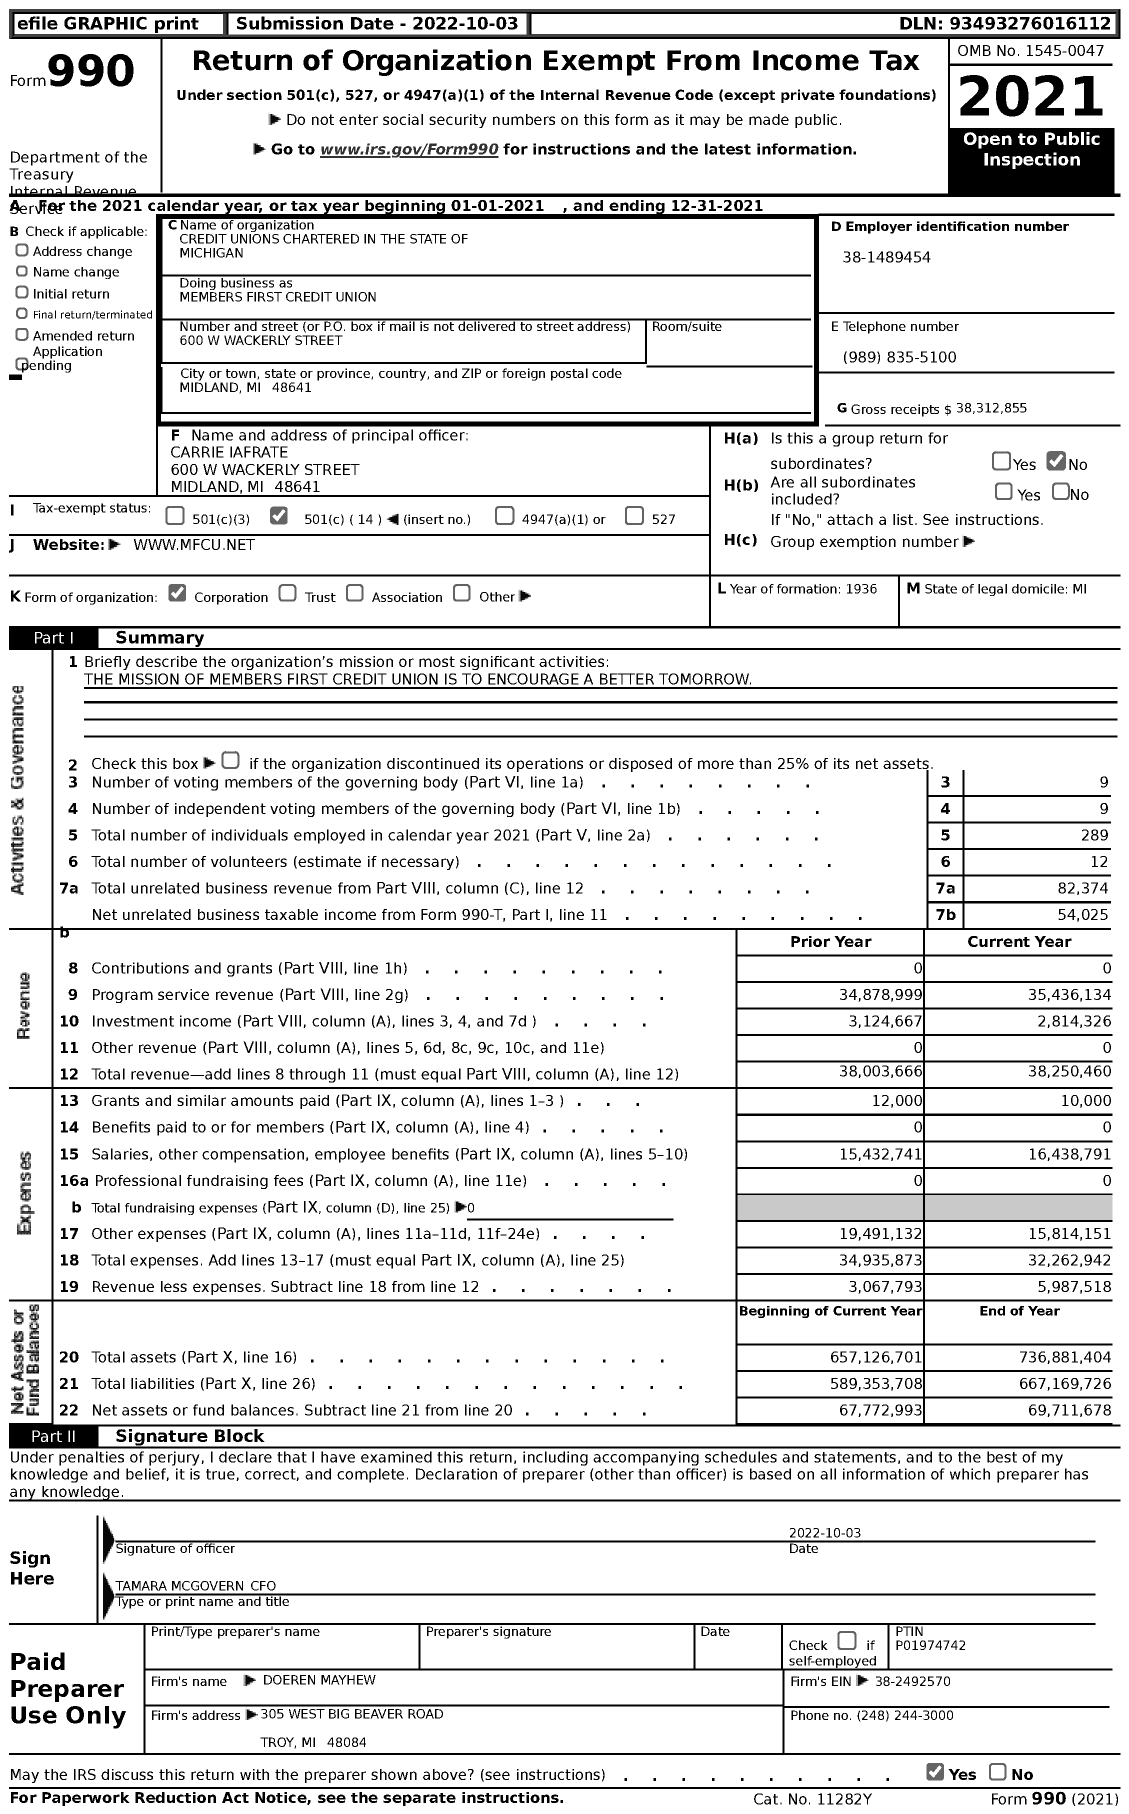 Image of first page of 2021 Form 990 for CREDIT UNIONS CHARTERED IN THE STATE OF Michigan - 126 Members First CREDIT Union (MFCU)